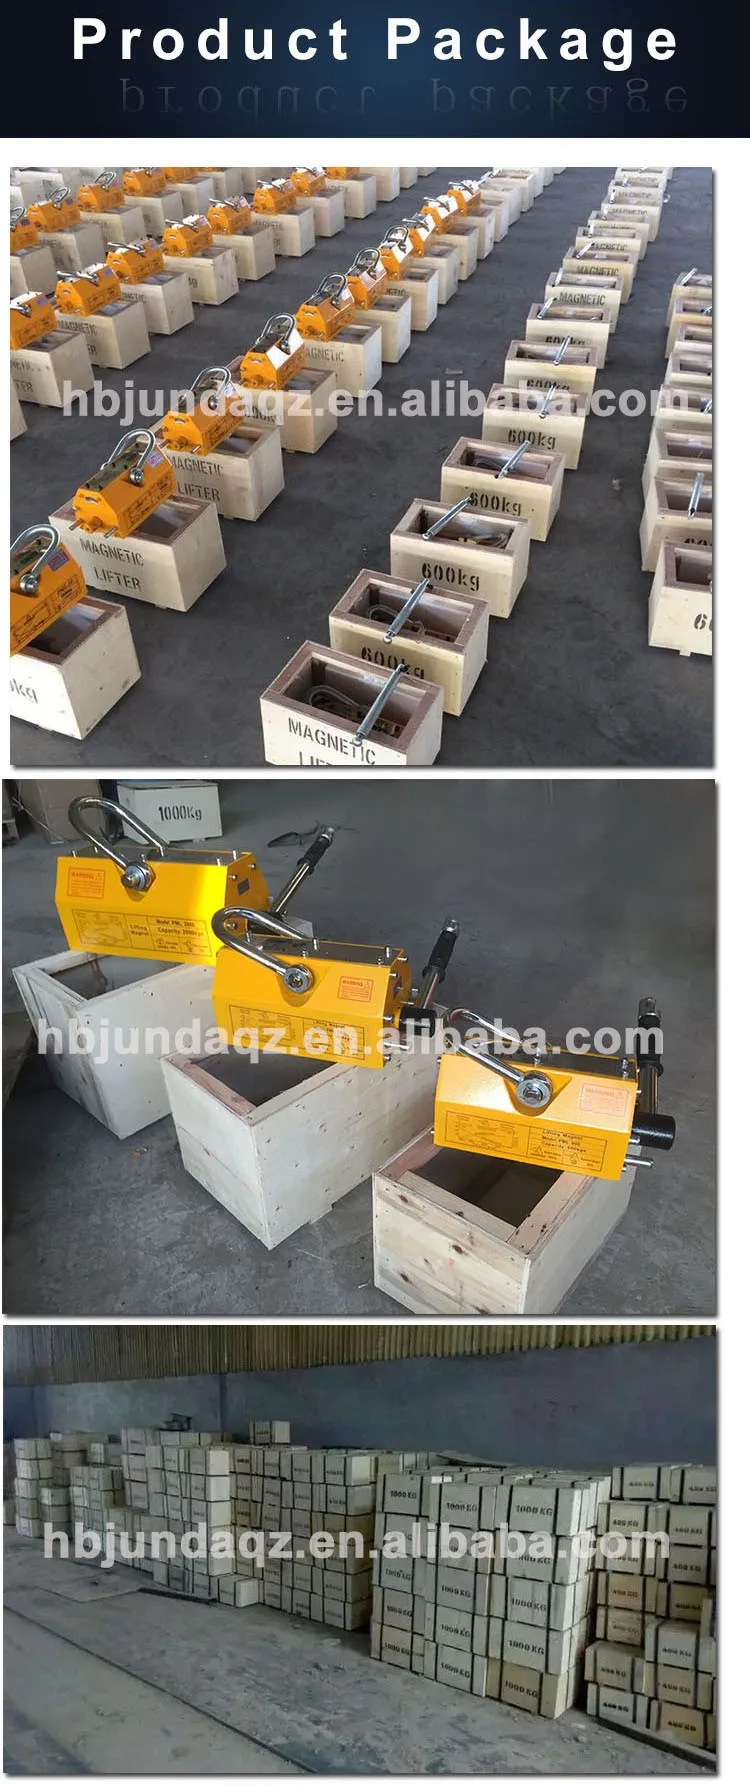 pml 1000 magnetic lifter